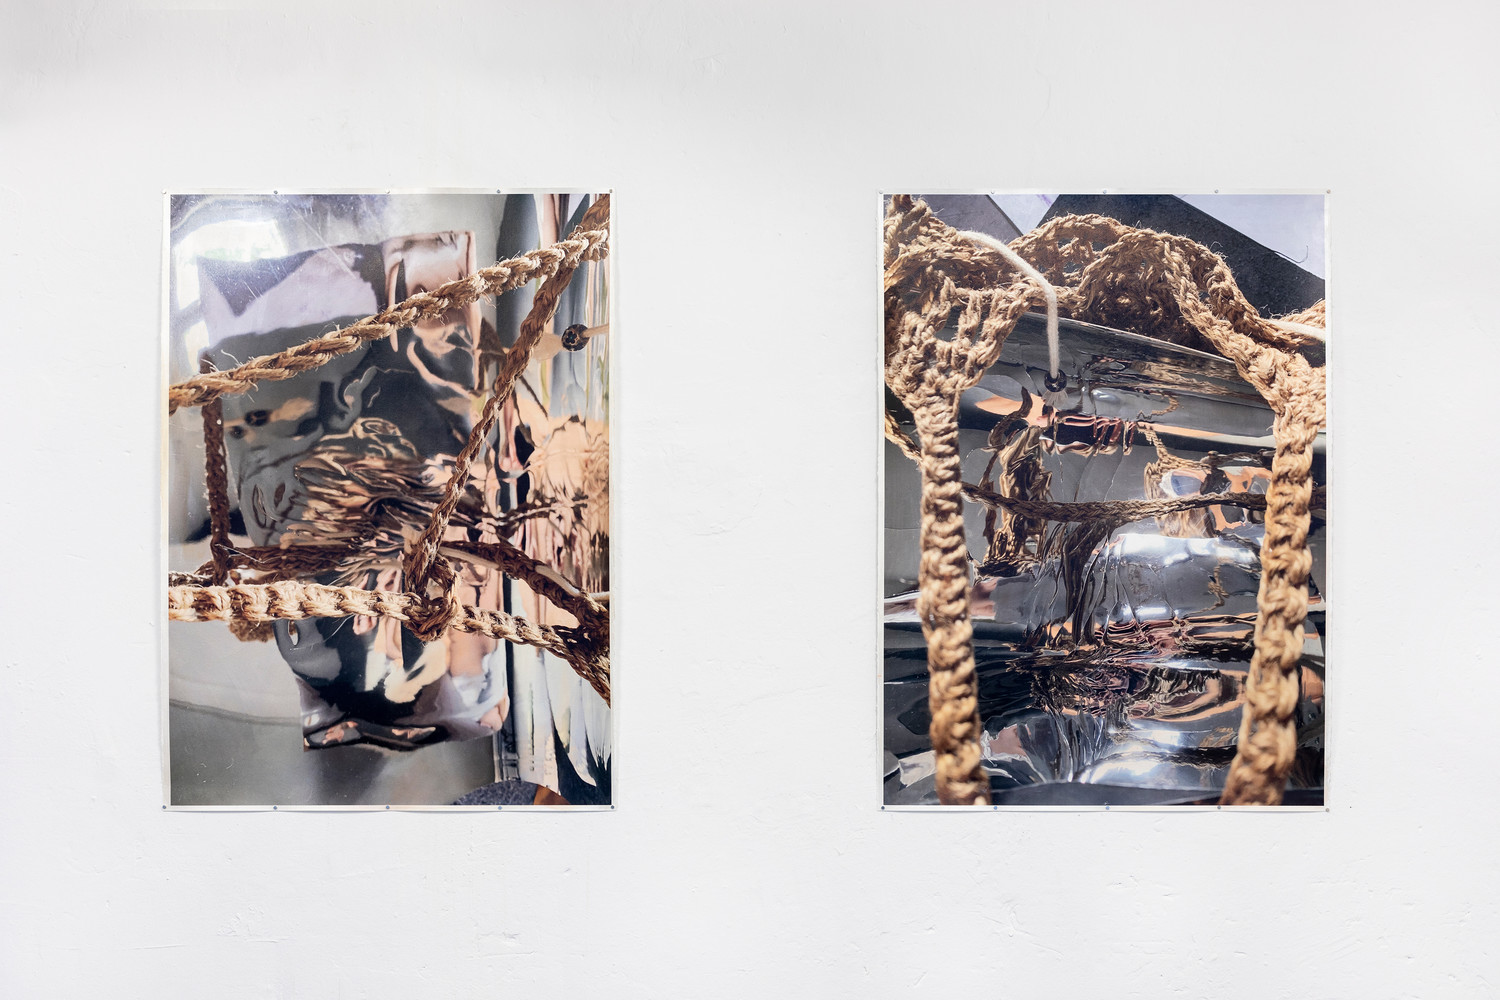 Self-portrait 3-4 [from left to right], 2020, acrylic and ink on paper, each 107 x 78 cm — © Manon Wertenbroek